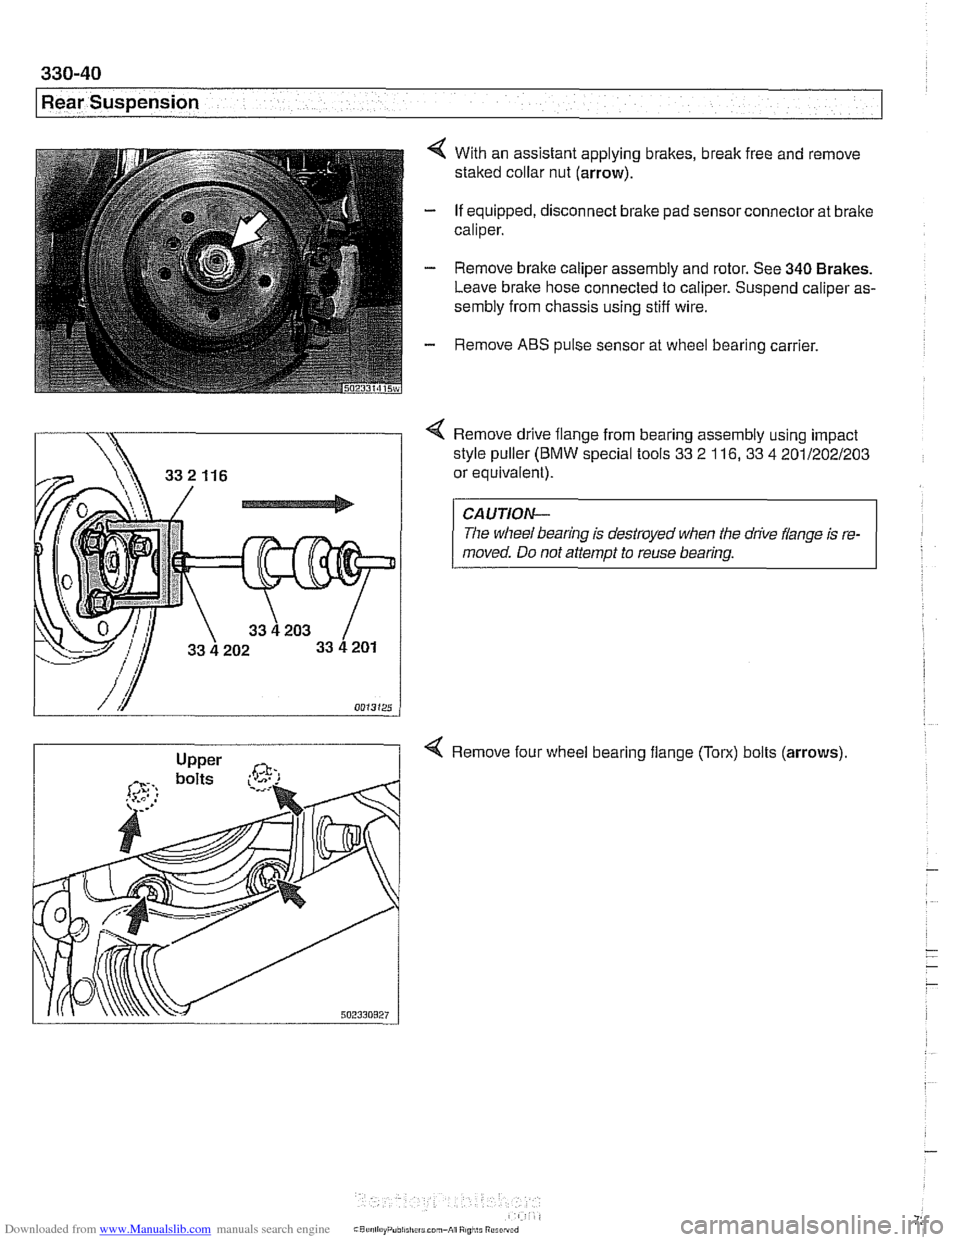 BMW 540i 1997 E39 Workshop Manual Downloaded from www.Manualslib.com manuals search engine 
330-40 
Rear Suspension 
4 With an assistant applying brakes, break free and  remove 
staked  collar nut  (arrow). 
- If equipped,  disconnect